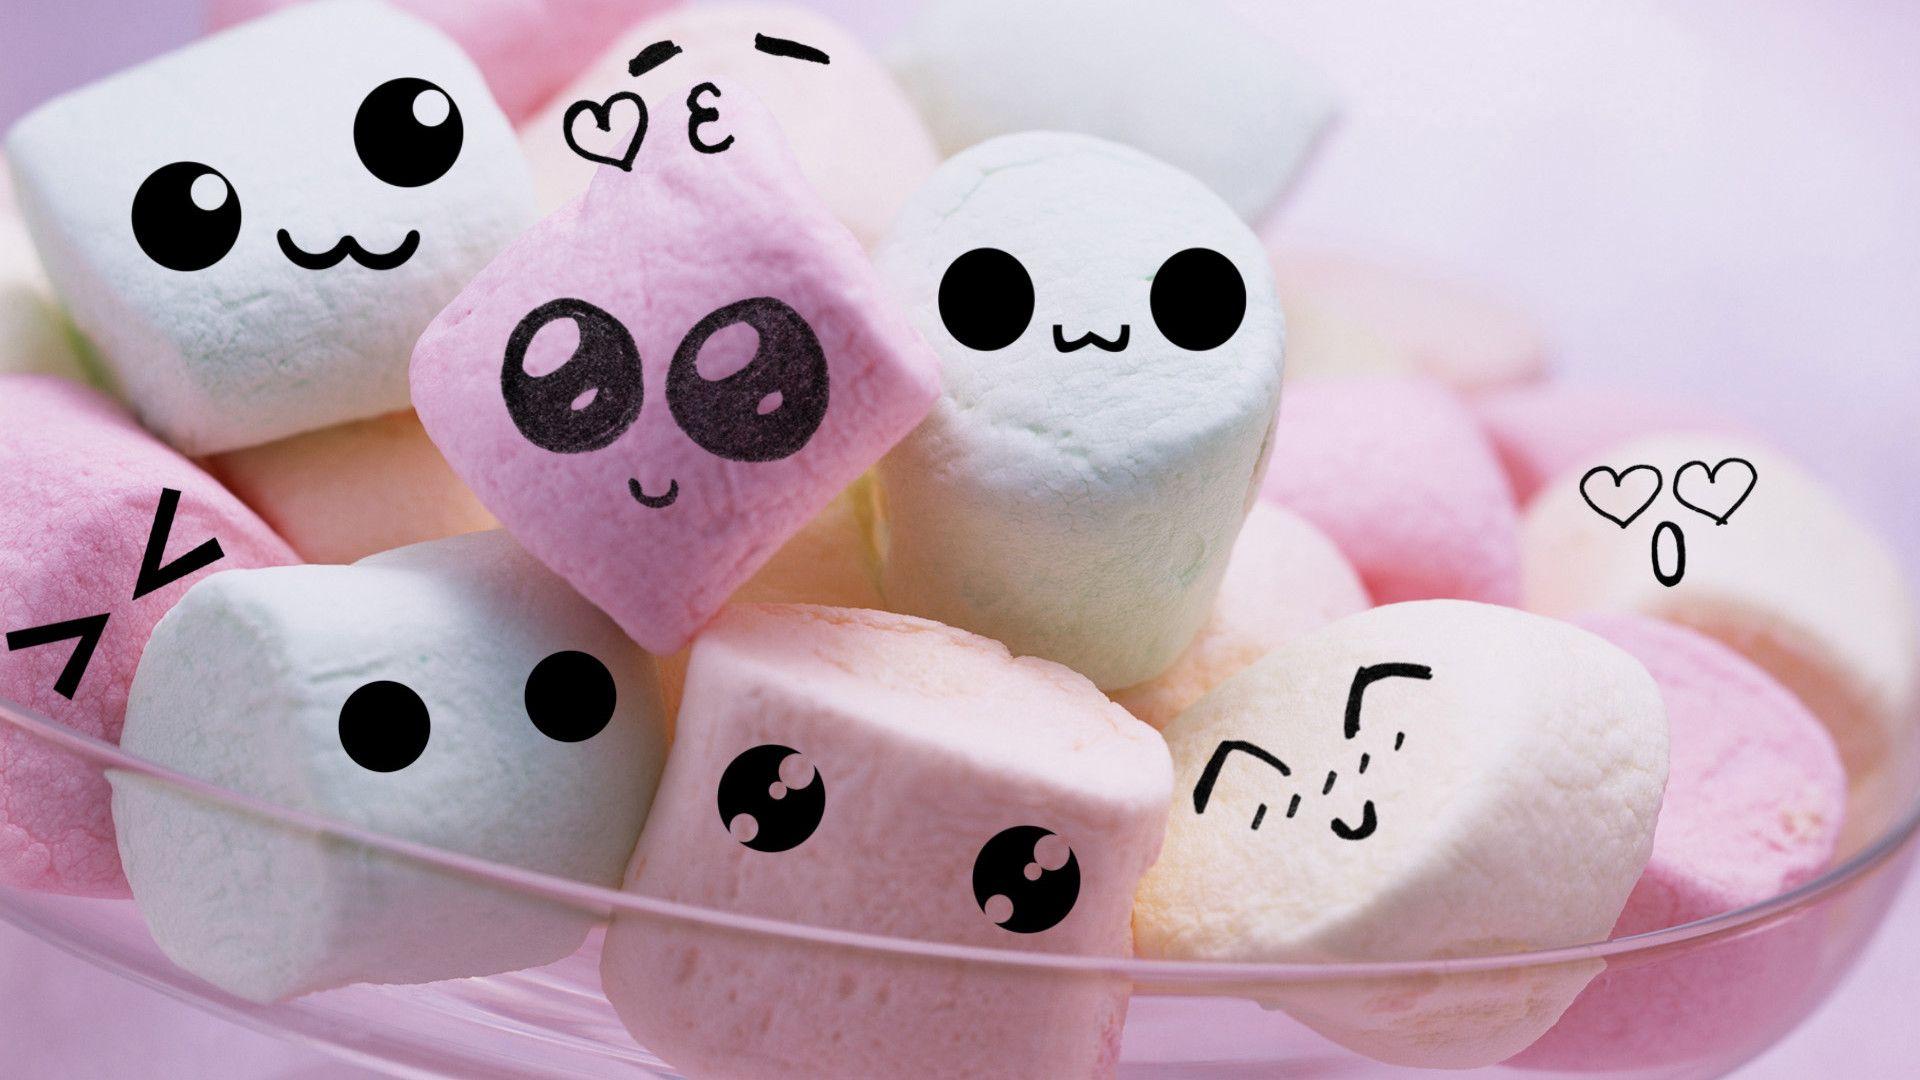 Cute And Funny Faces On Marshmallows Wallpaper